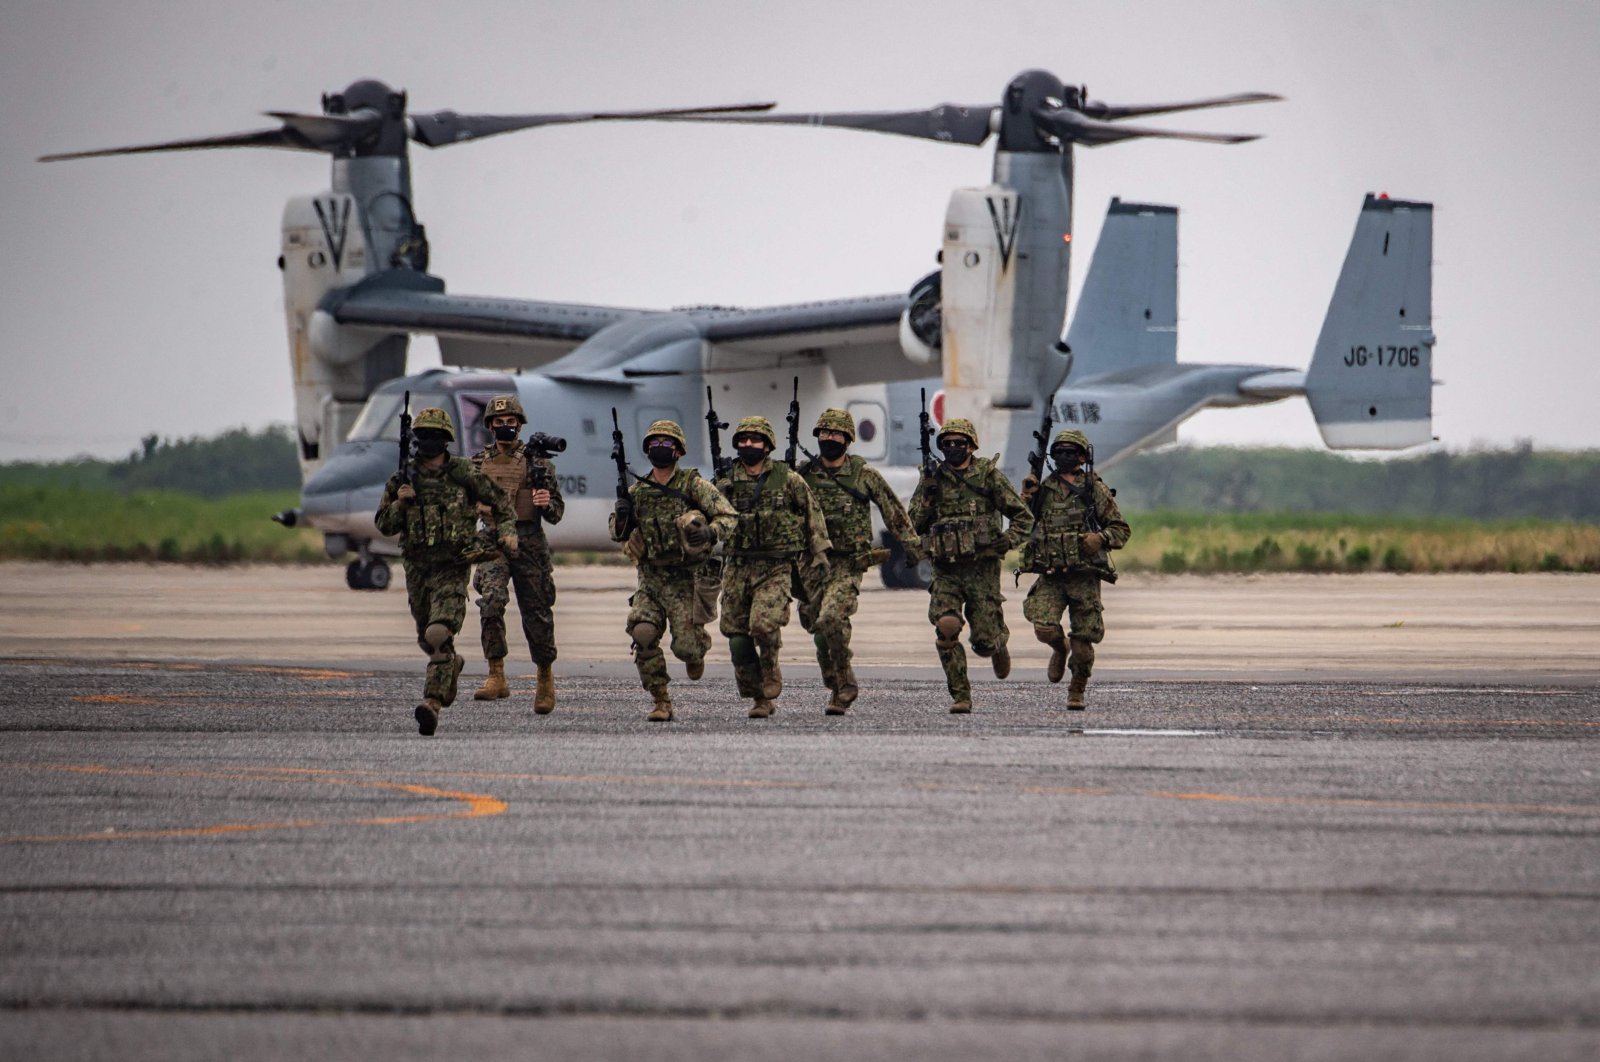 Members of the Japan Ground Self-Defense Force take part in a military display in front of a V-22 Osprey at the Japan Ground Self-Defense Force&#039;s Camp Kisarazu in Chiba prefecture, Japan, June 16, 2022. (AFP Photo)